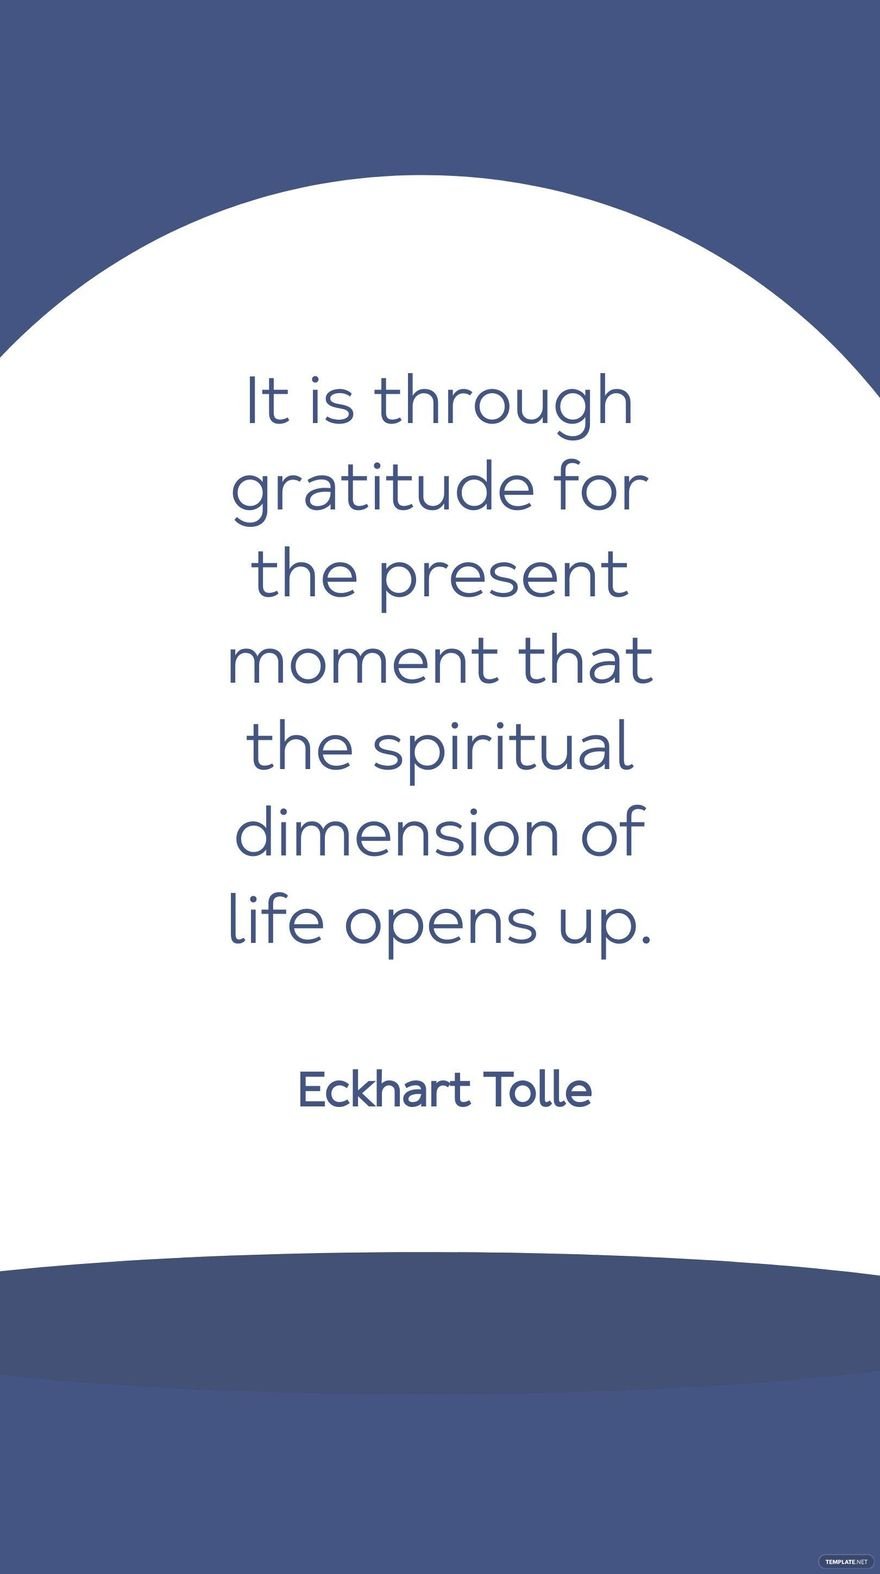 Free Eckhart Tolle -It is through gratitude for the present moment that the spiritual dimension of life opens up. in JPG